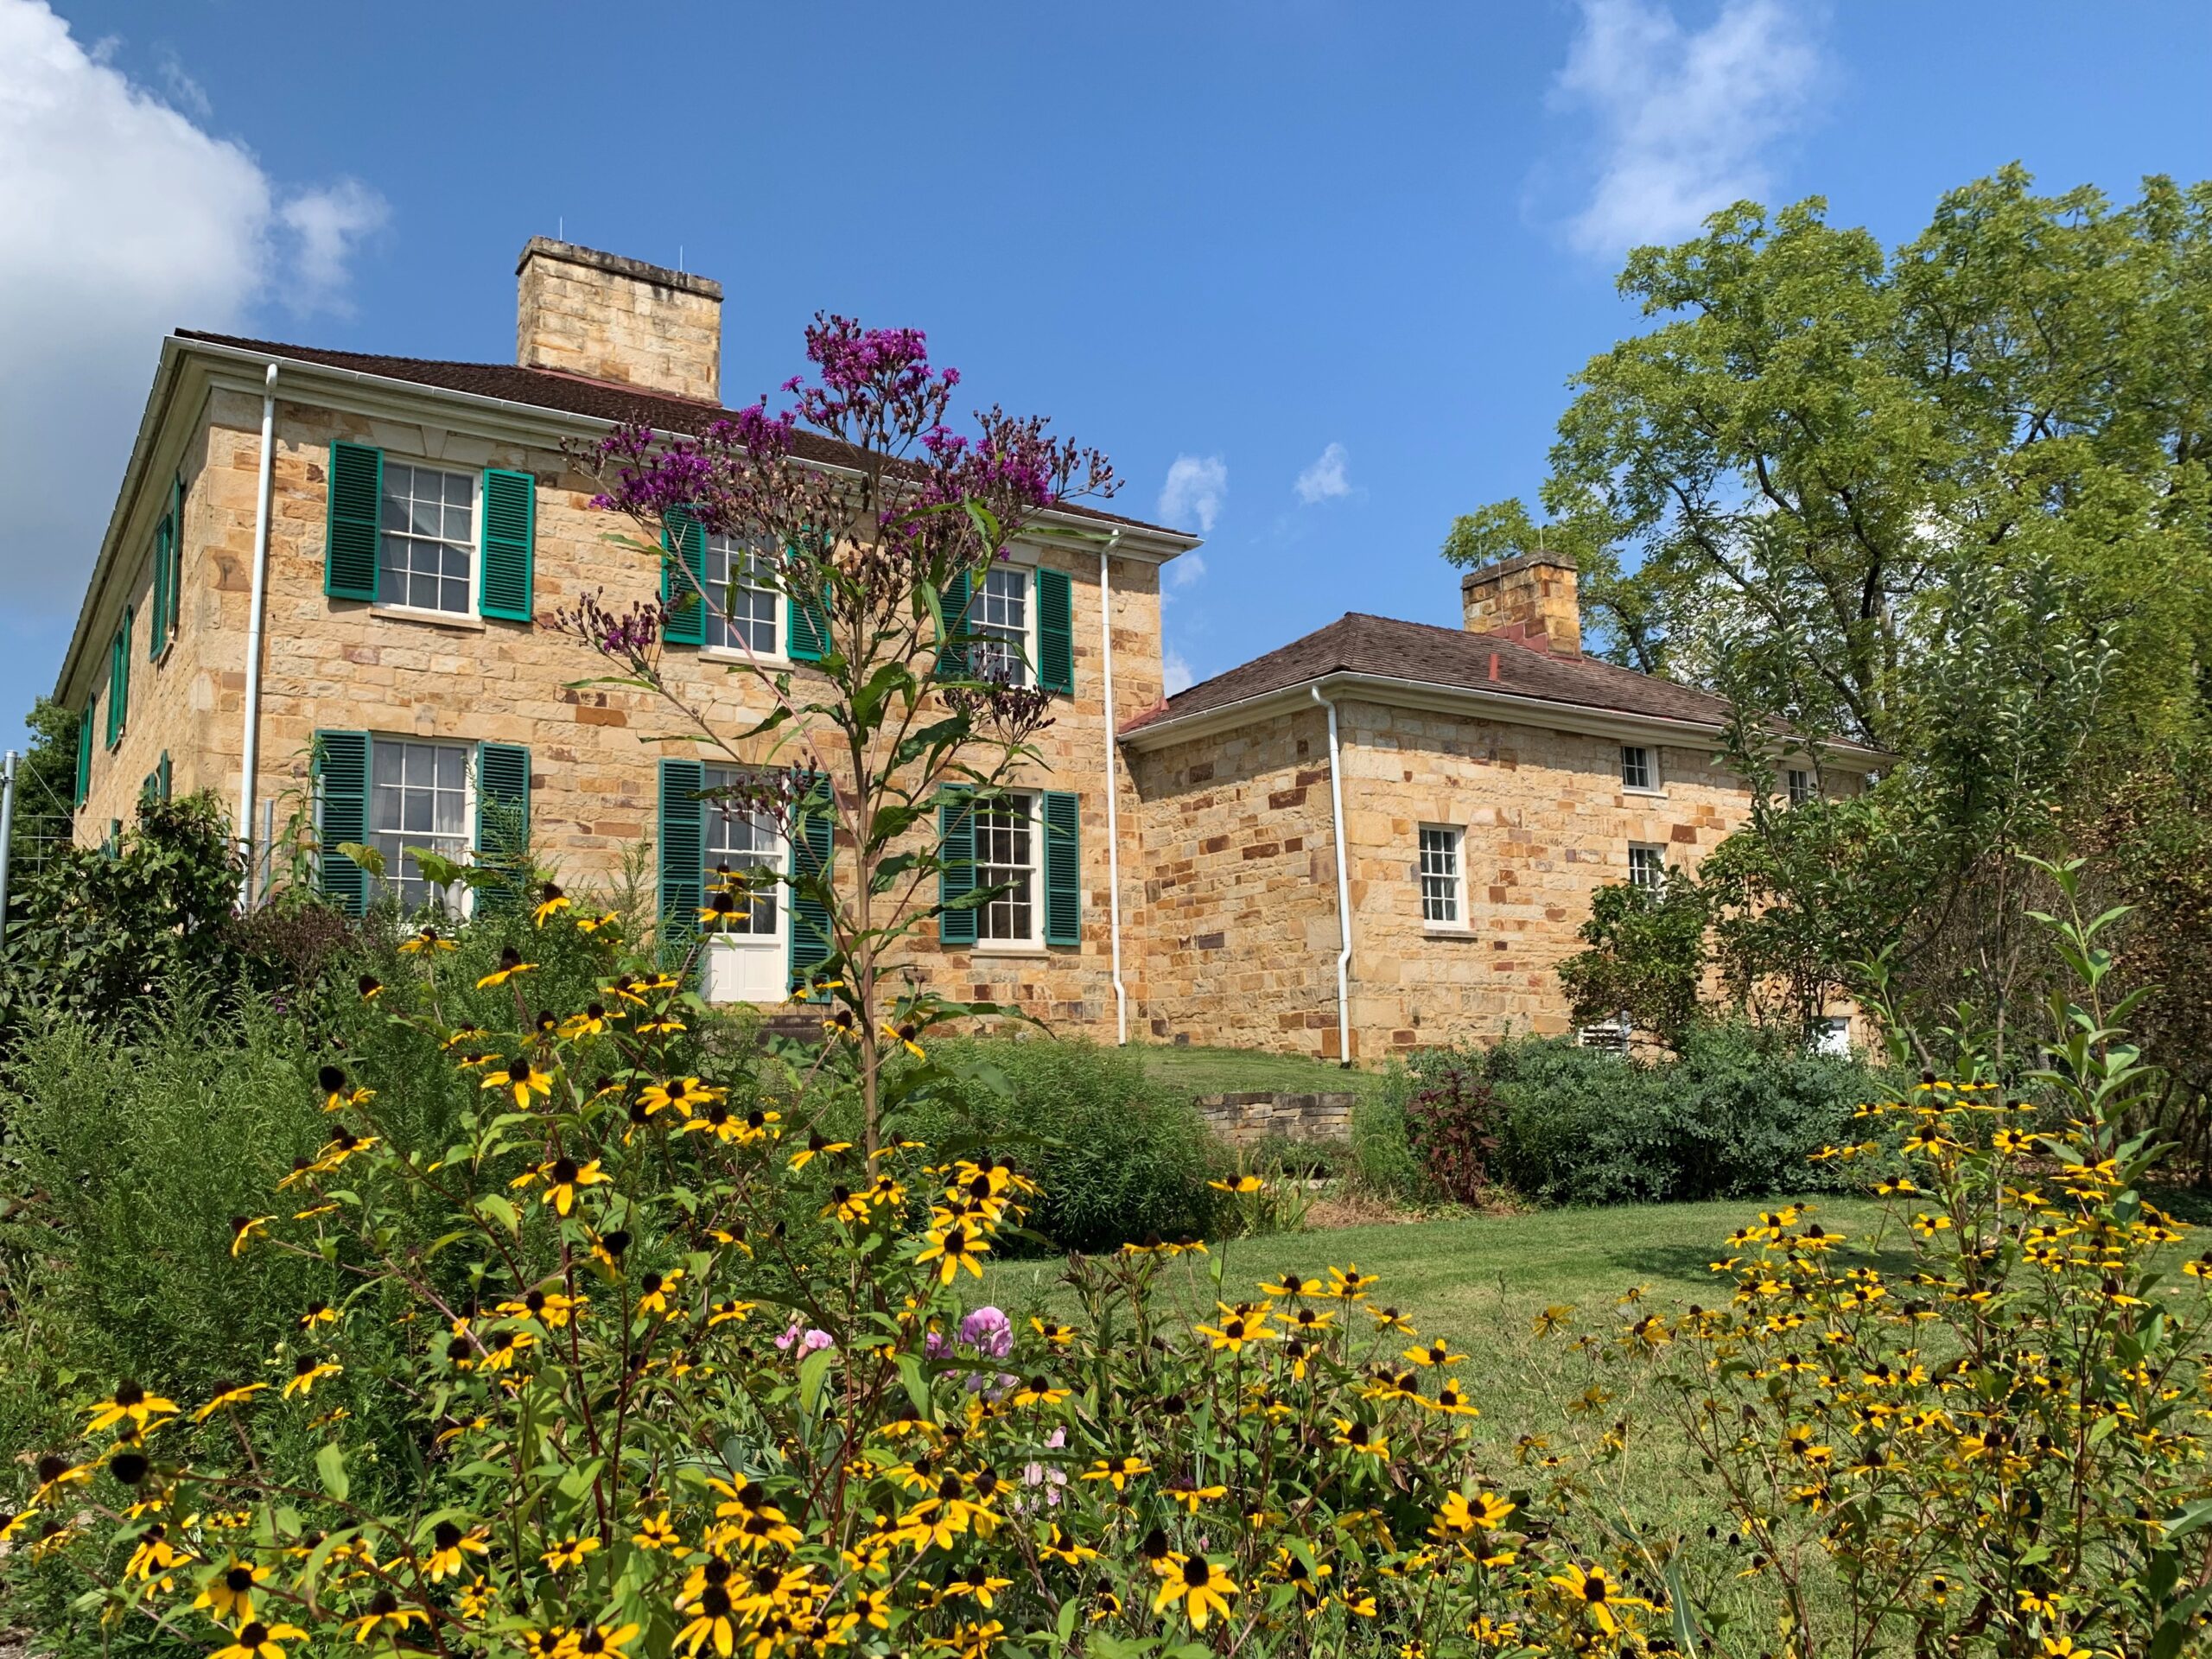 Outside of Adena Mansion showing the gardens and mansion